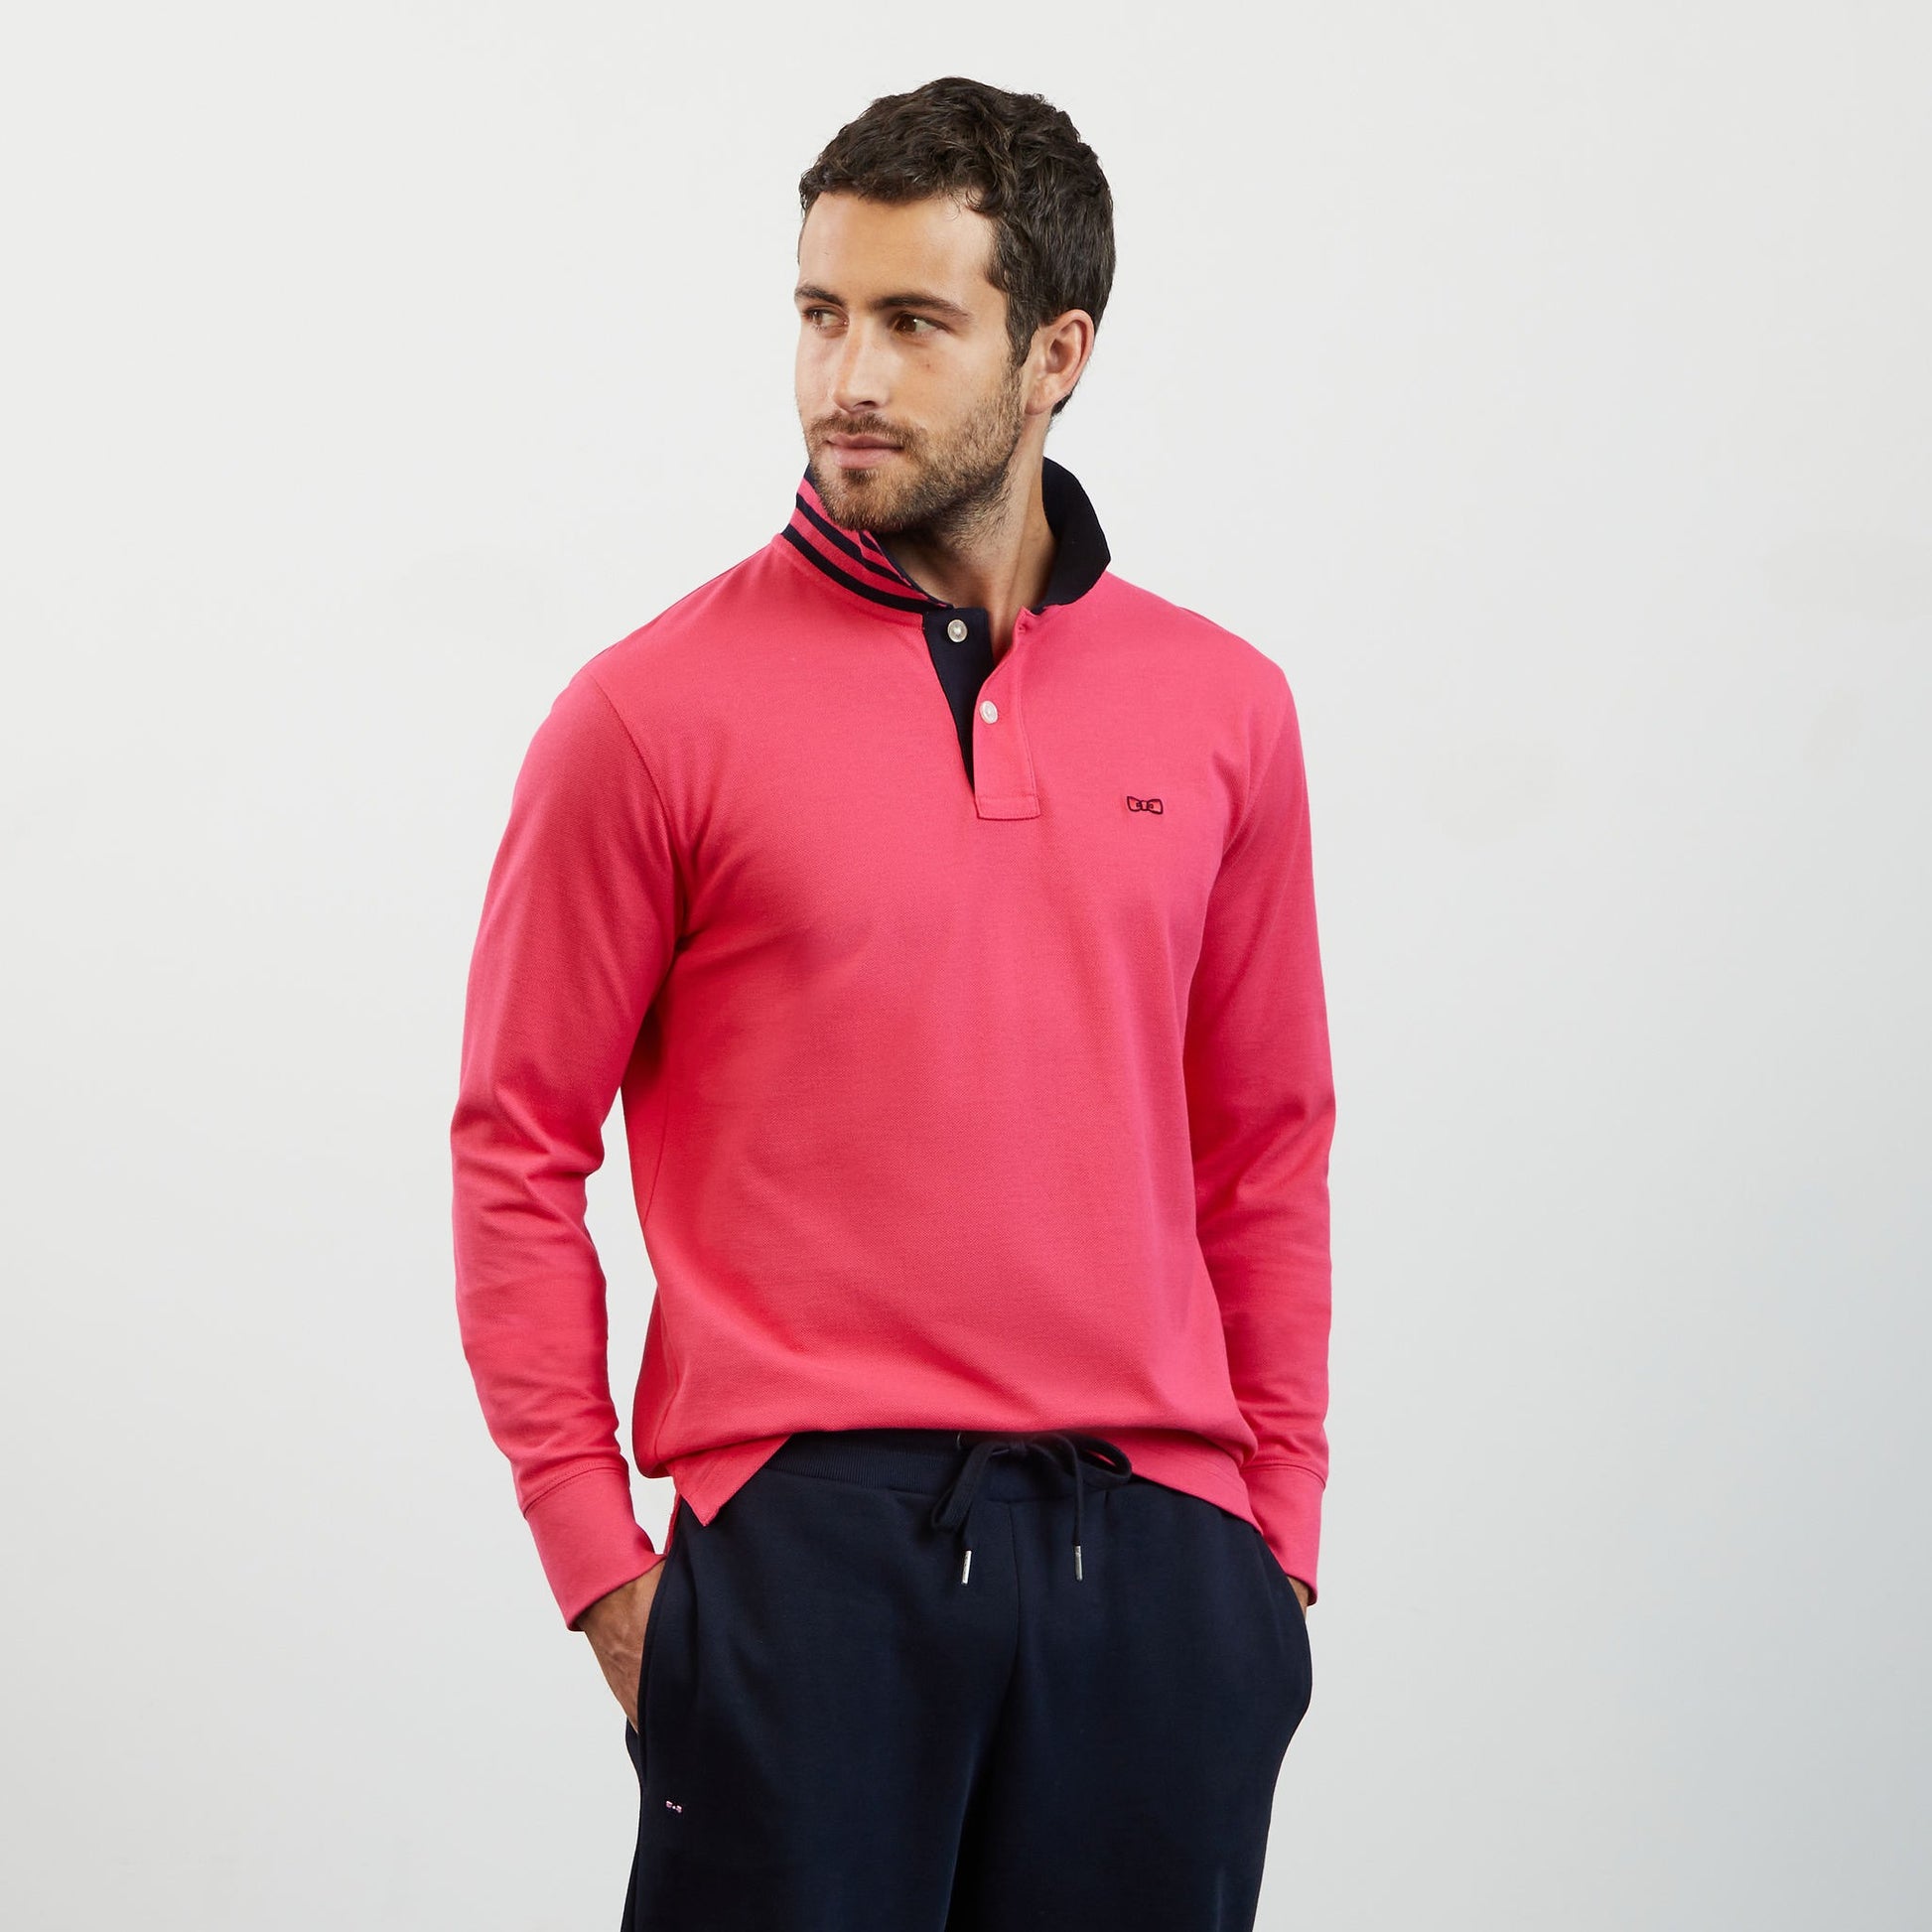 Polo BORA manches longues Otago rugby rose pour homme